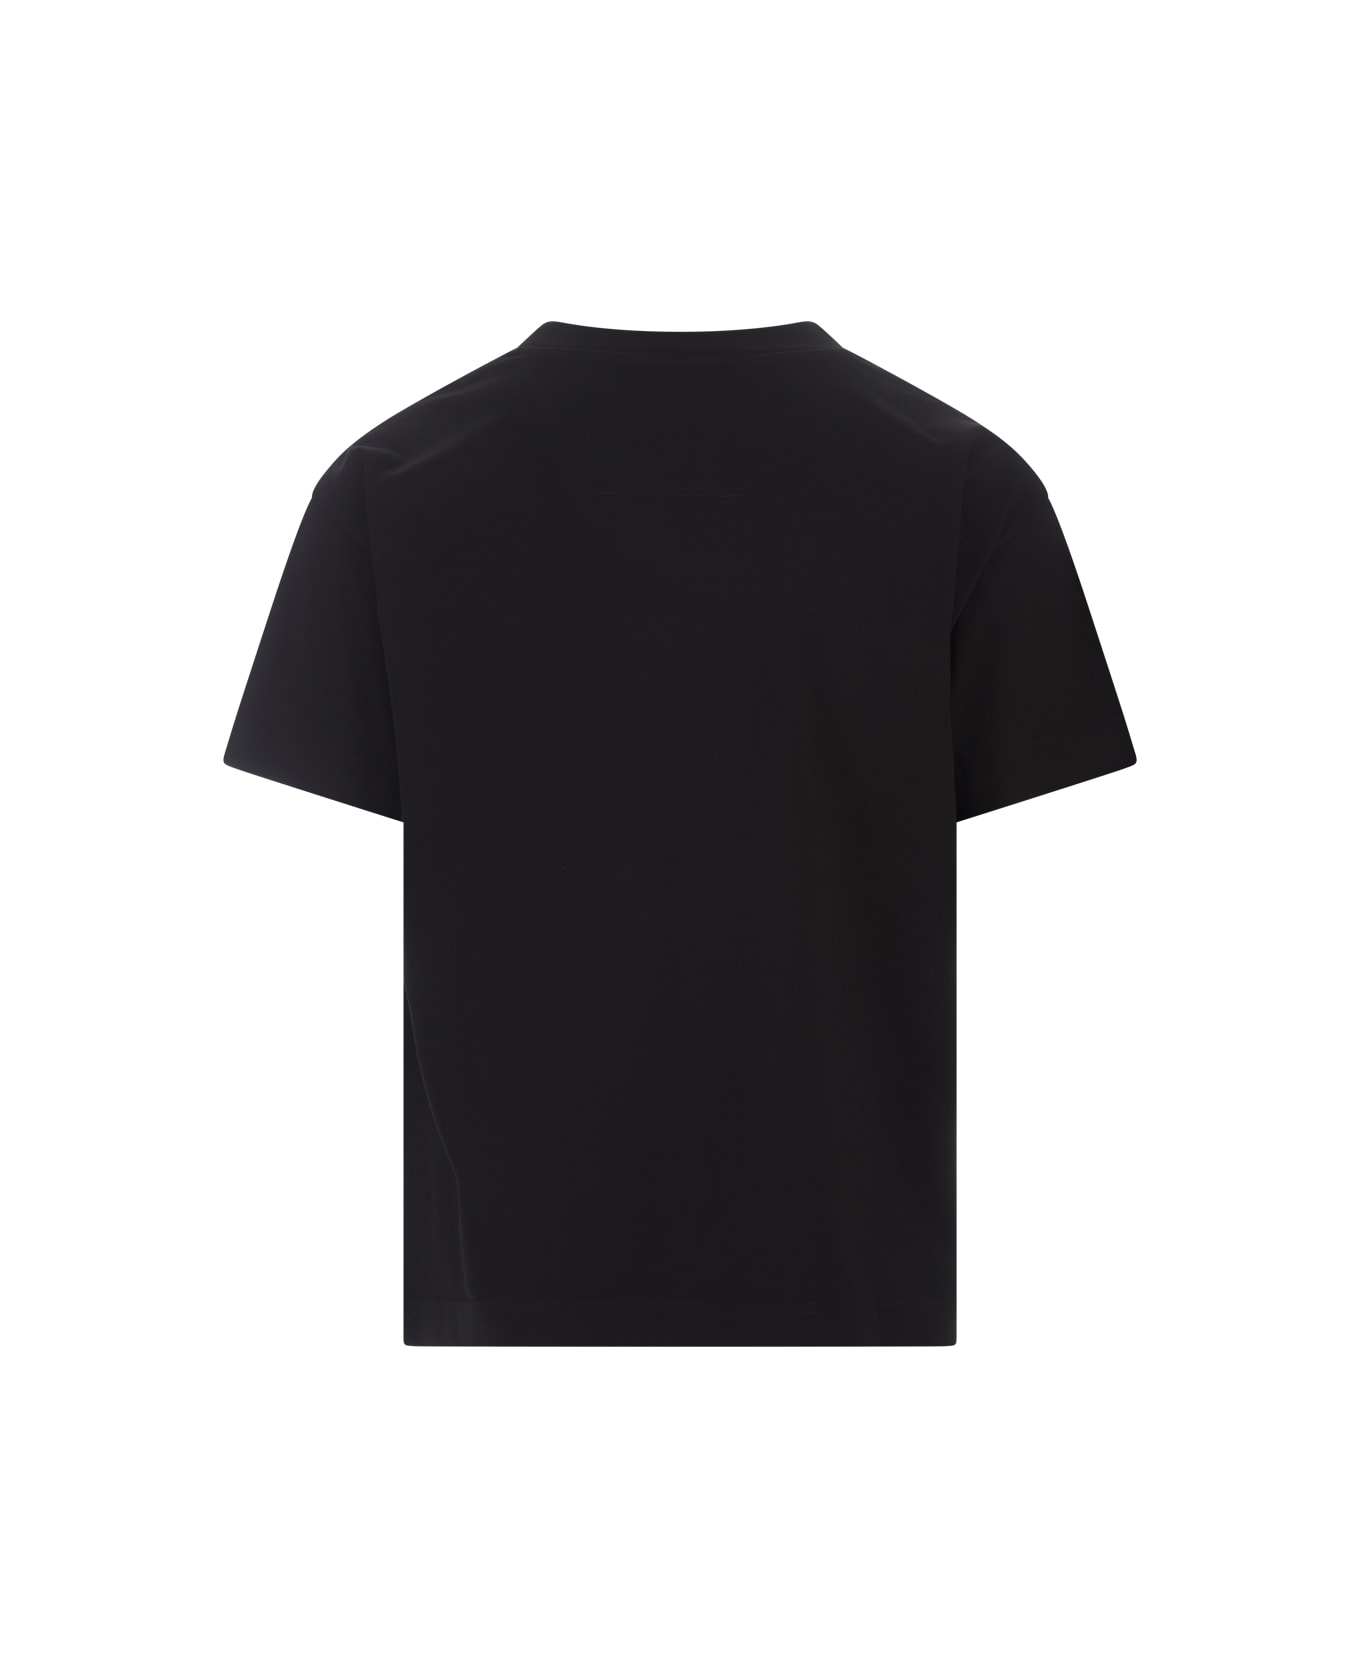 Givenchy Large 4g Stars T-shirt In Black Cotton - Black シャツ